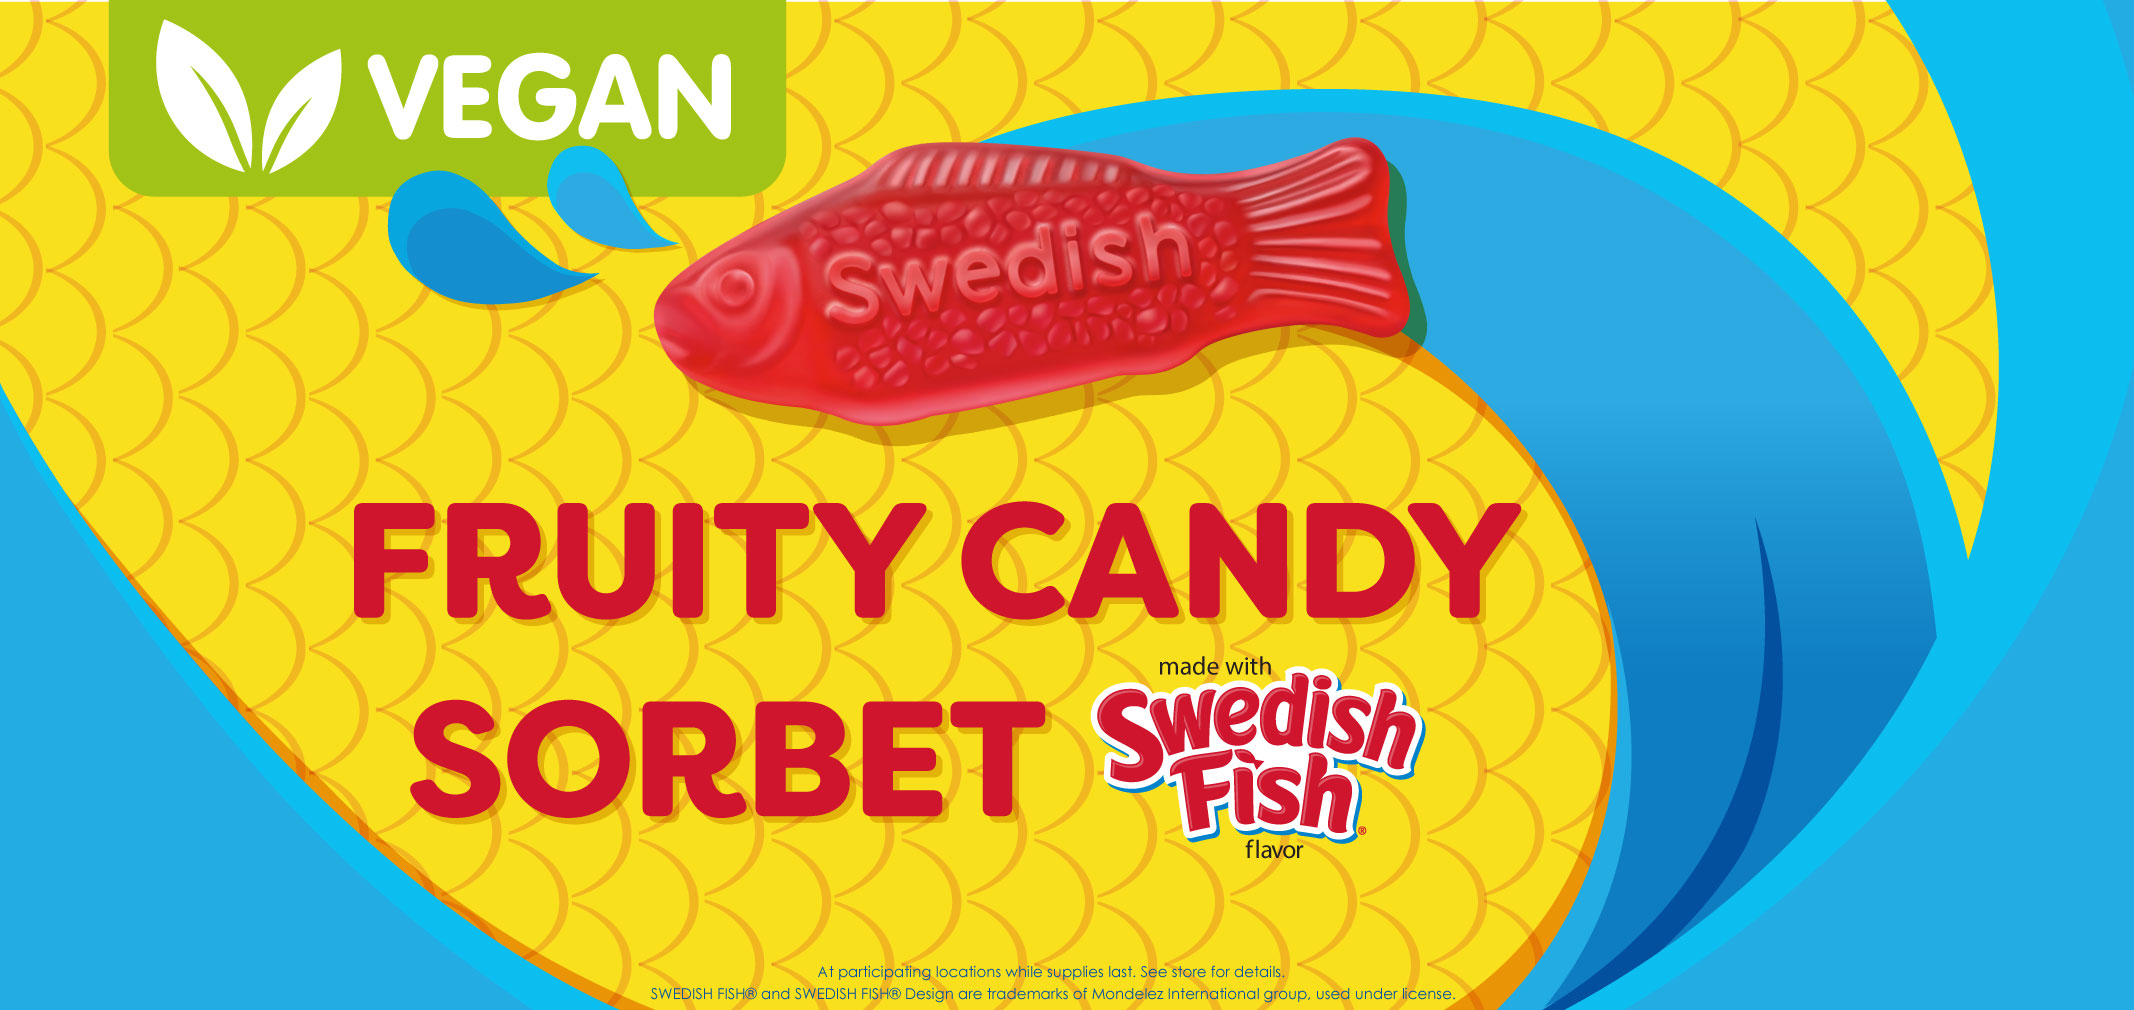 fruity candy sorbet made with Swedish Fish flavor label image